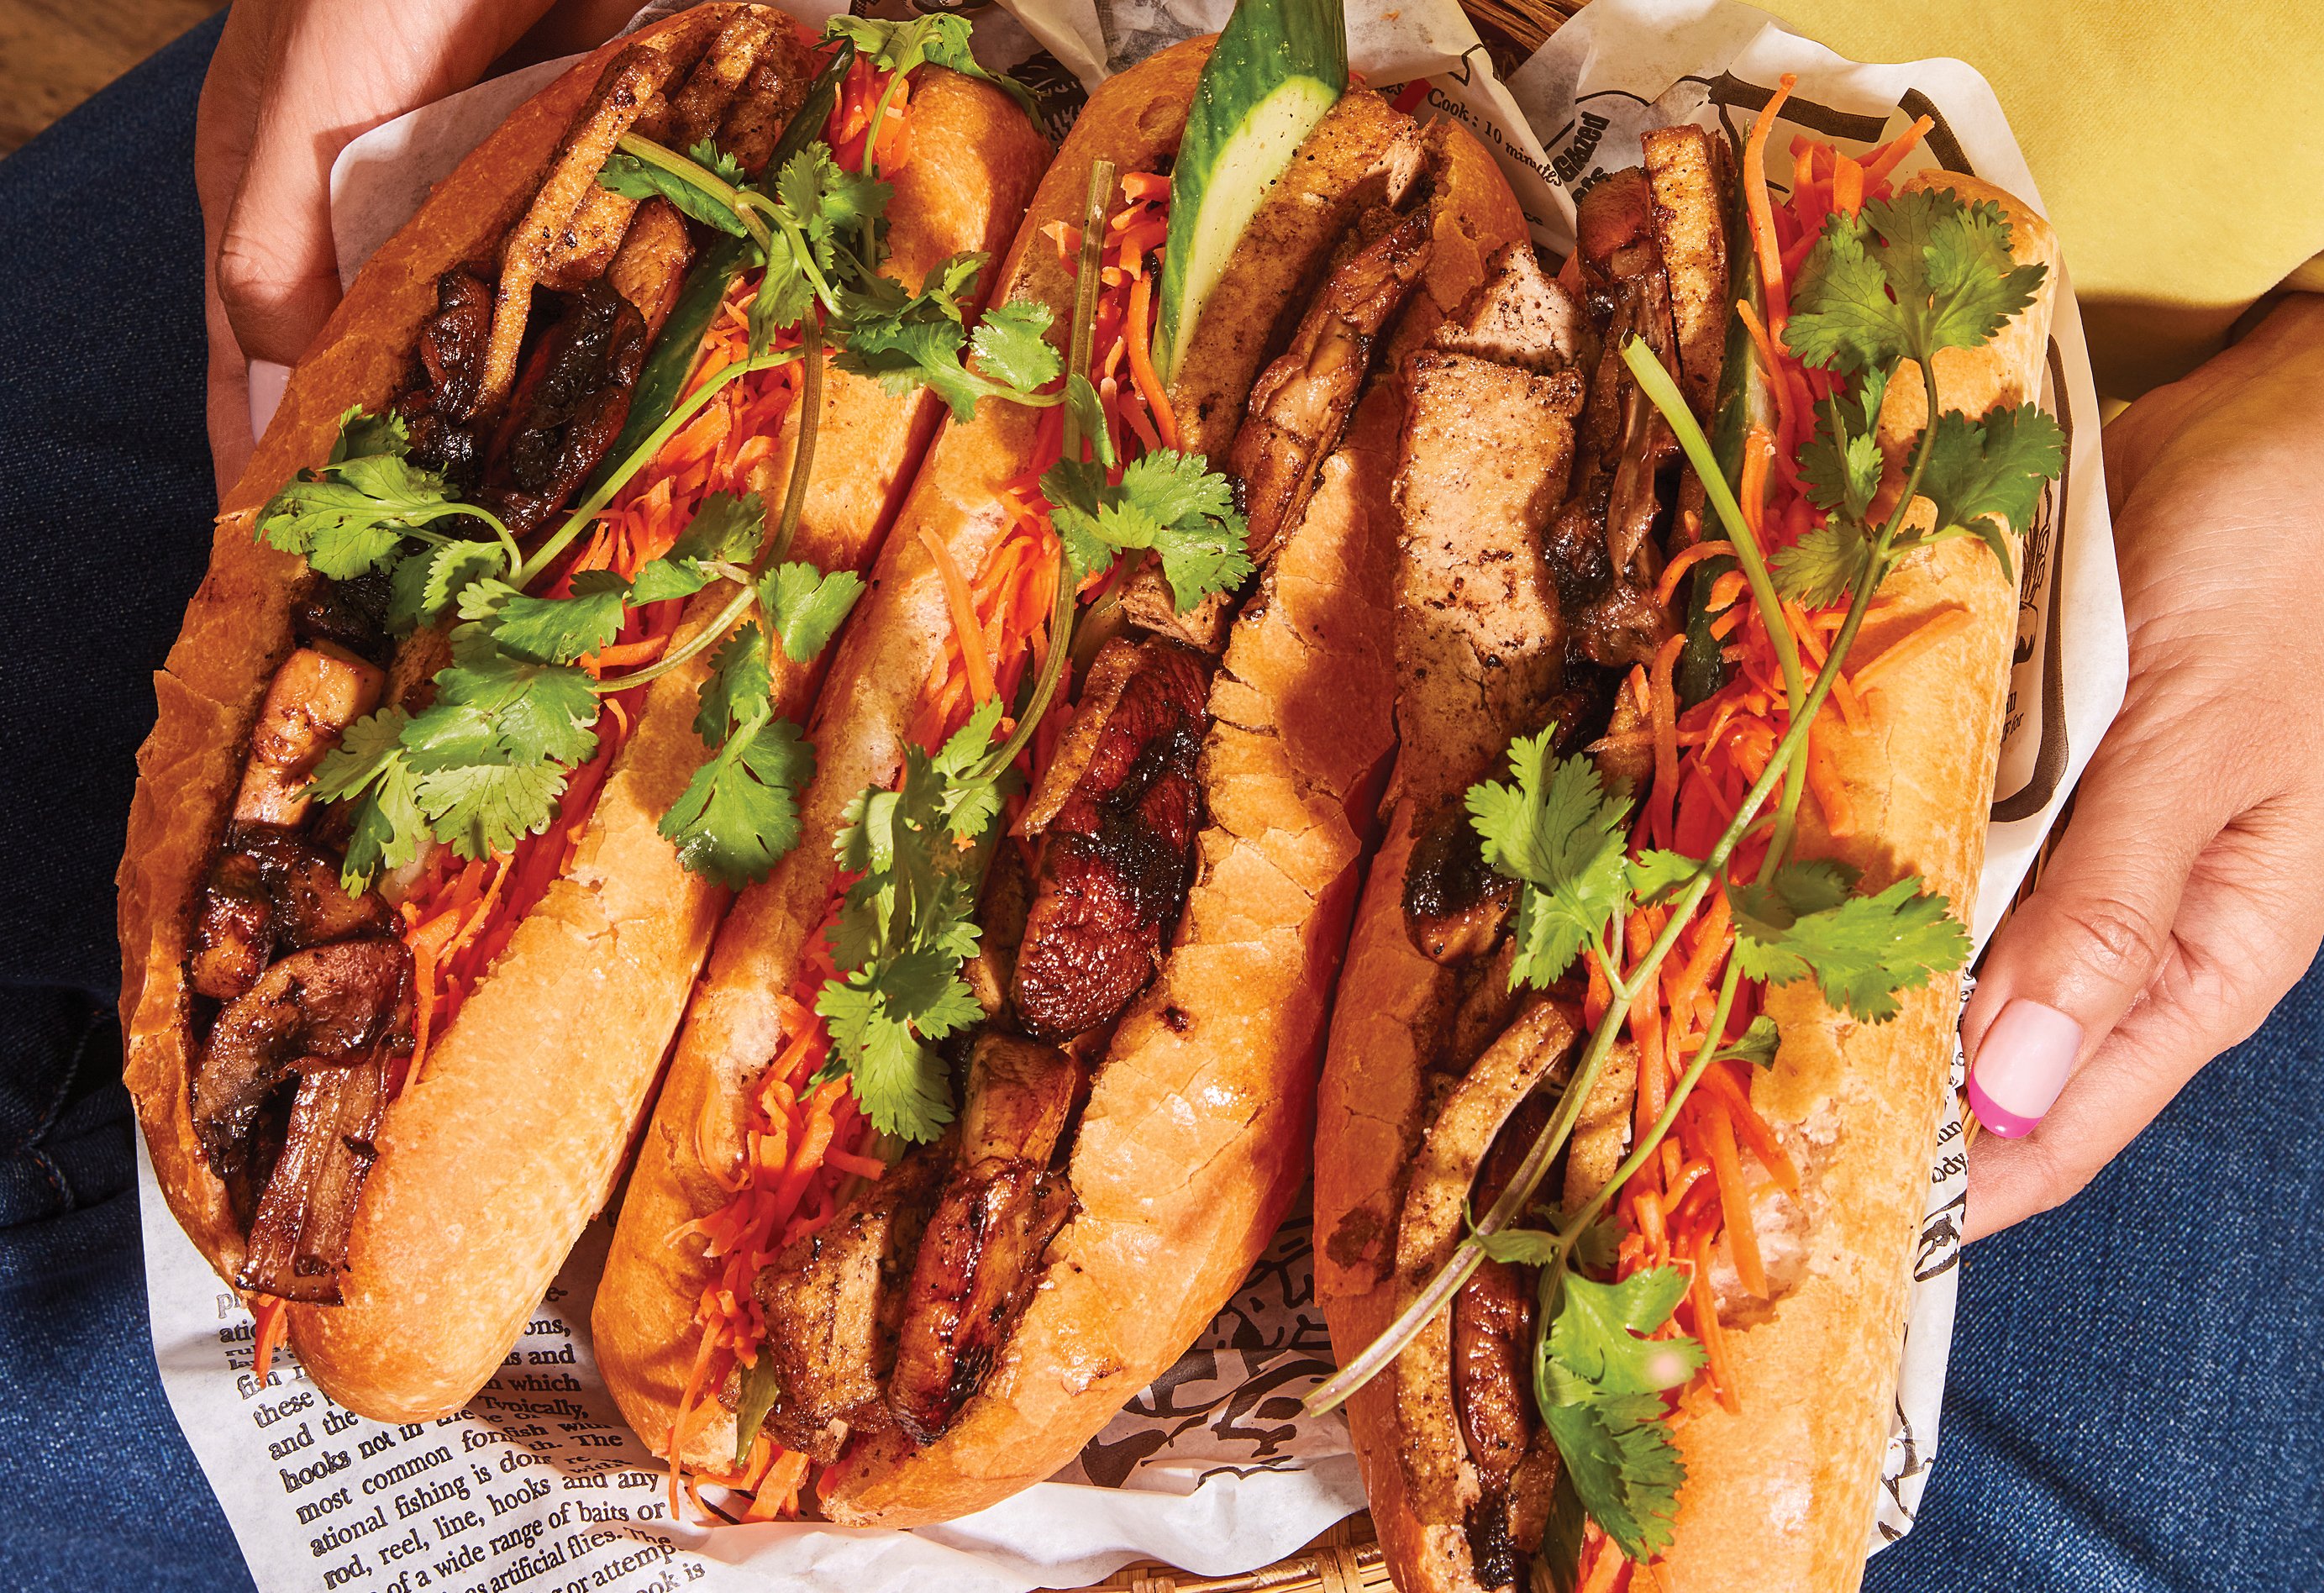 Woman holding three banh mi sandwiches that are partially open in a tray